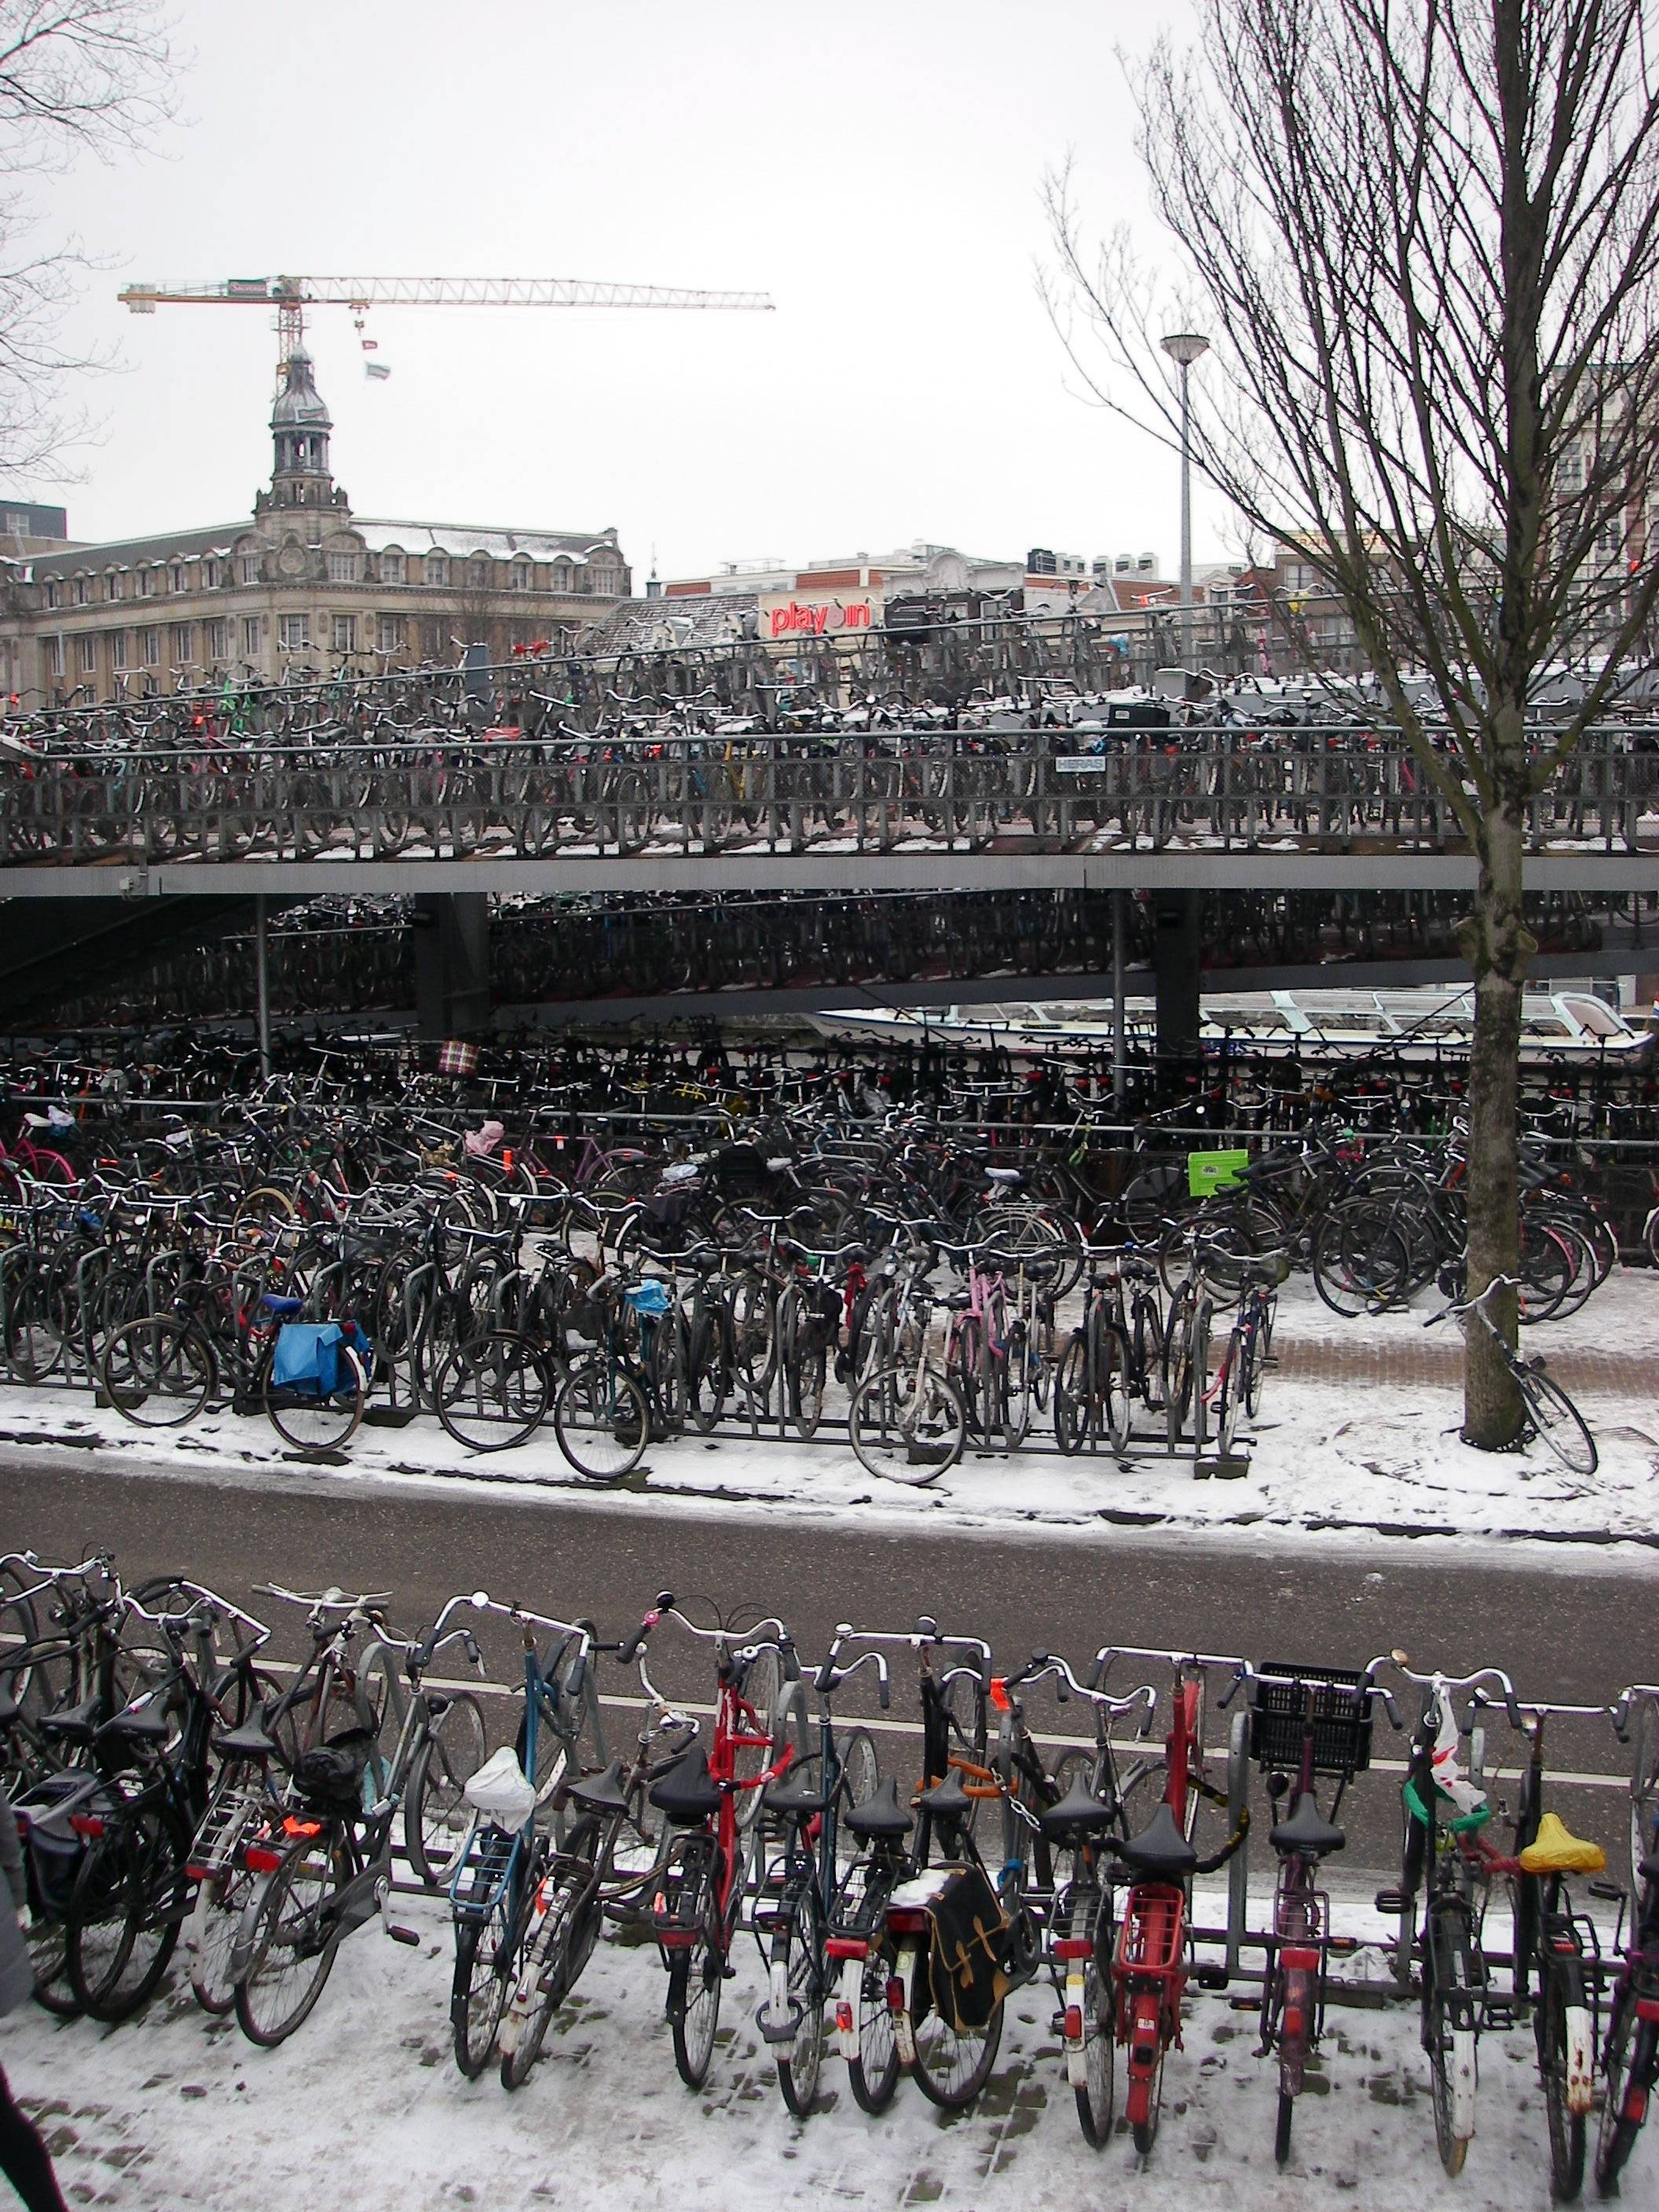 The average parking lot in The Netherlands.